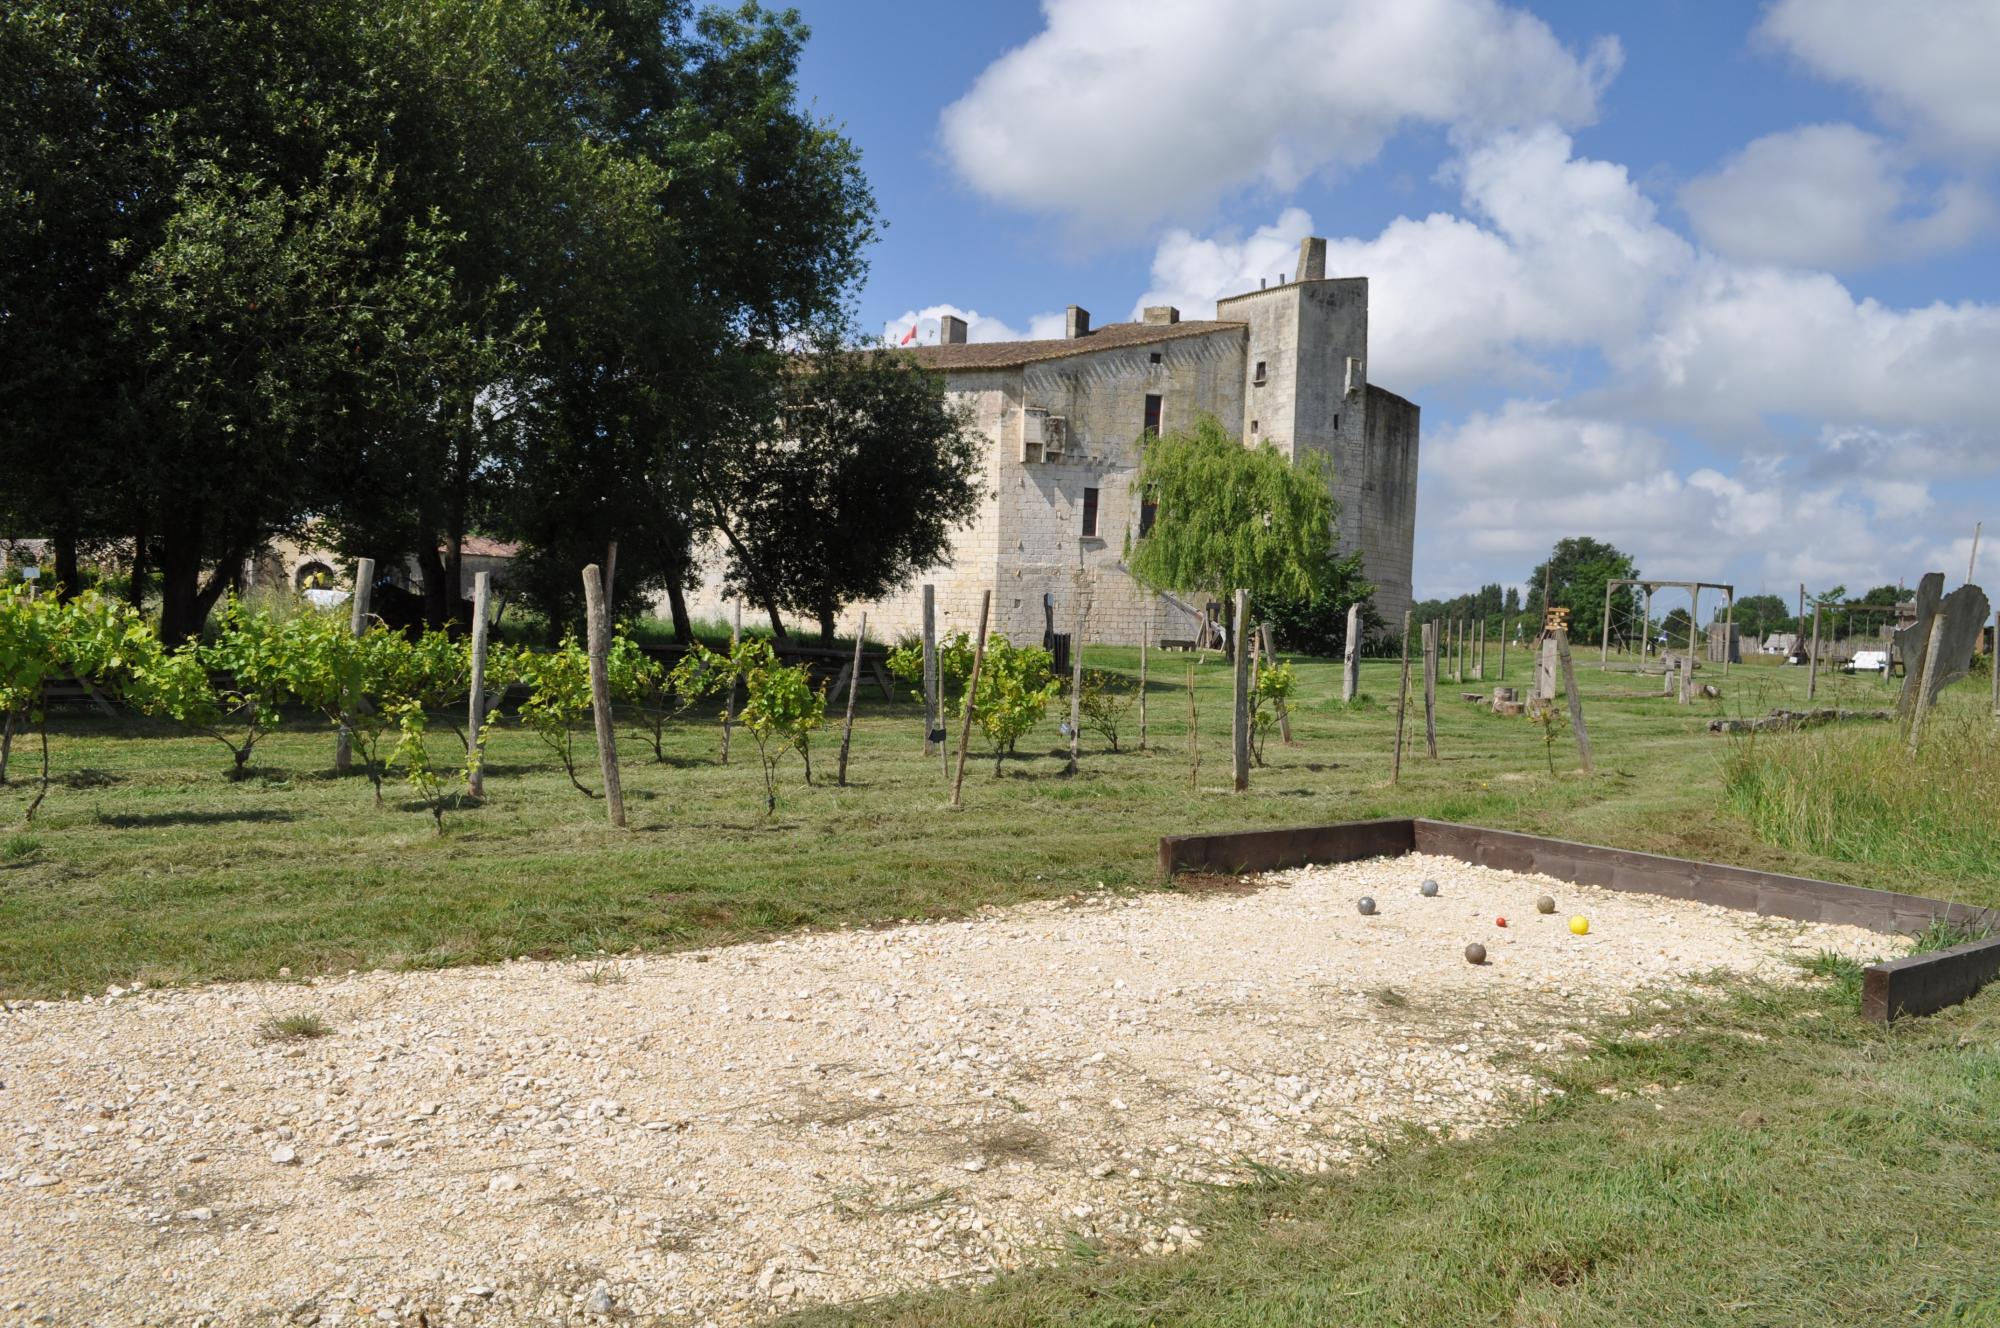 Contact the fortified castle and medieval theme park of Saint Jean d'Angle, near Rochefort